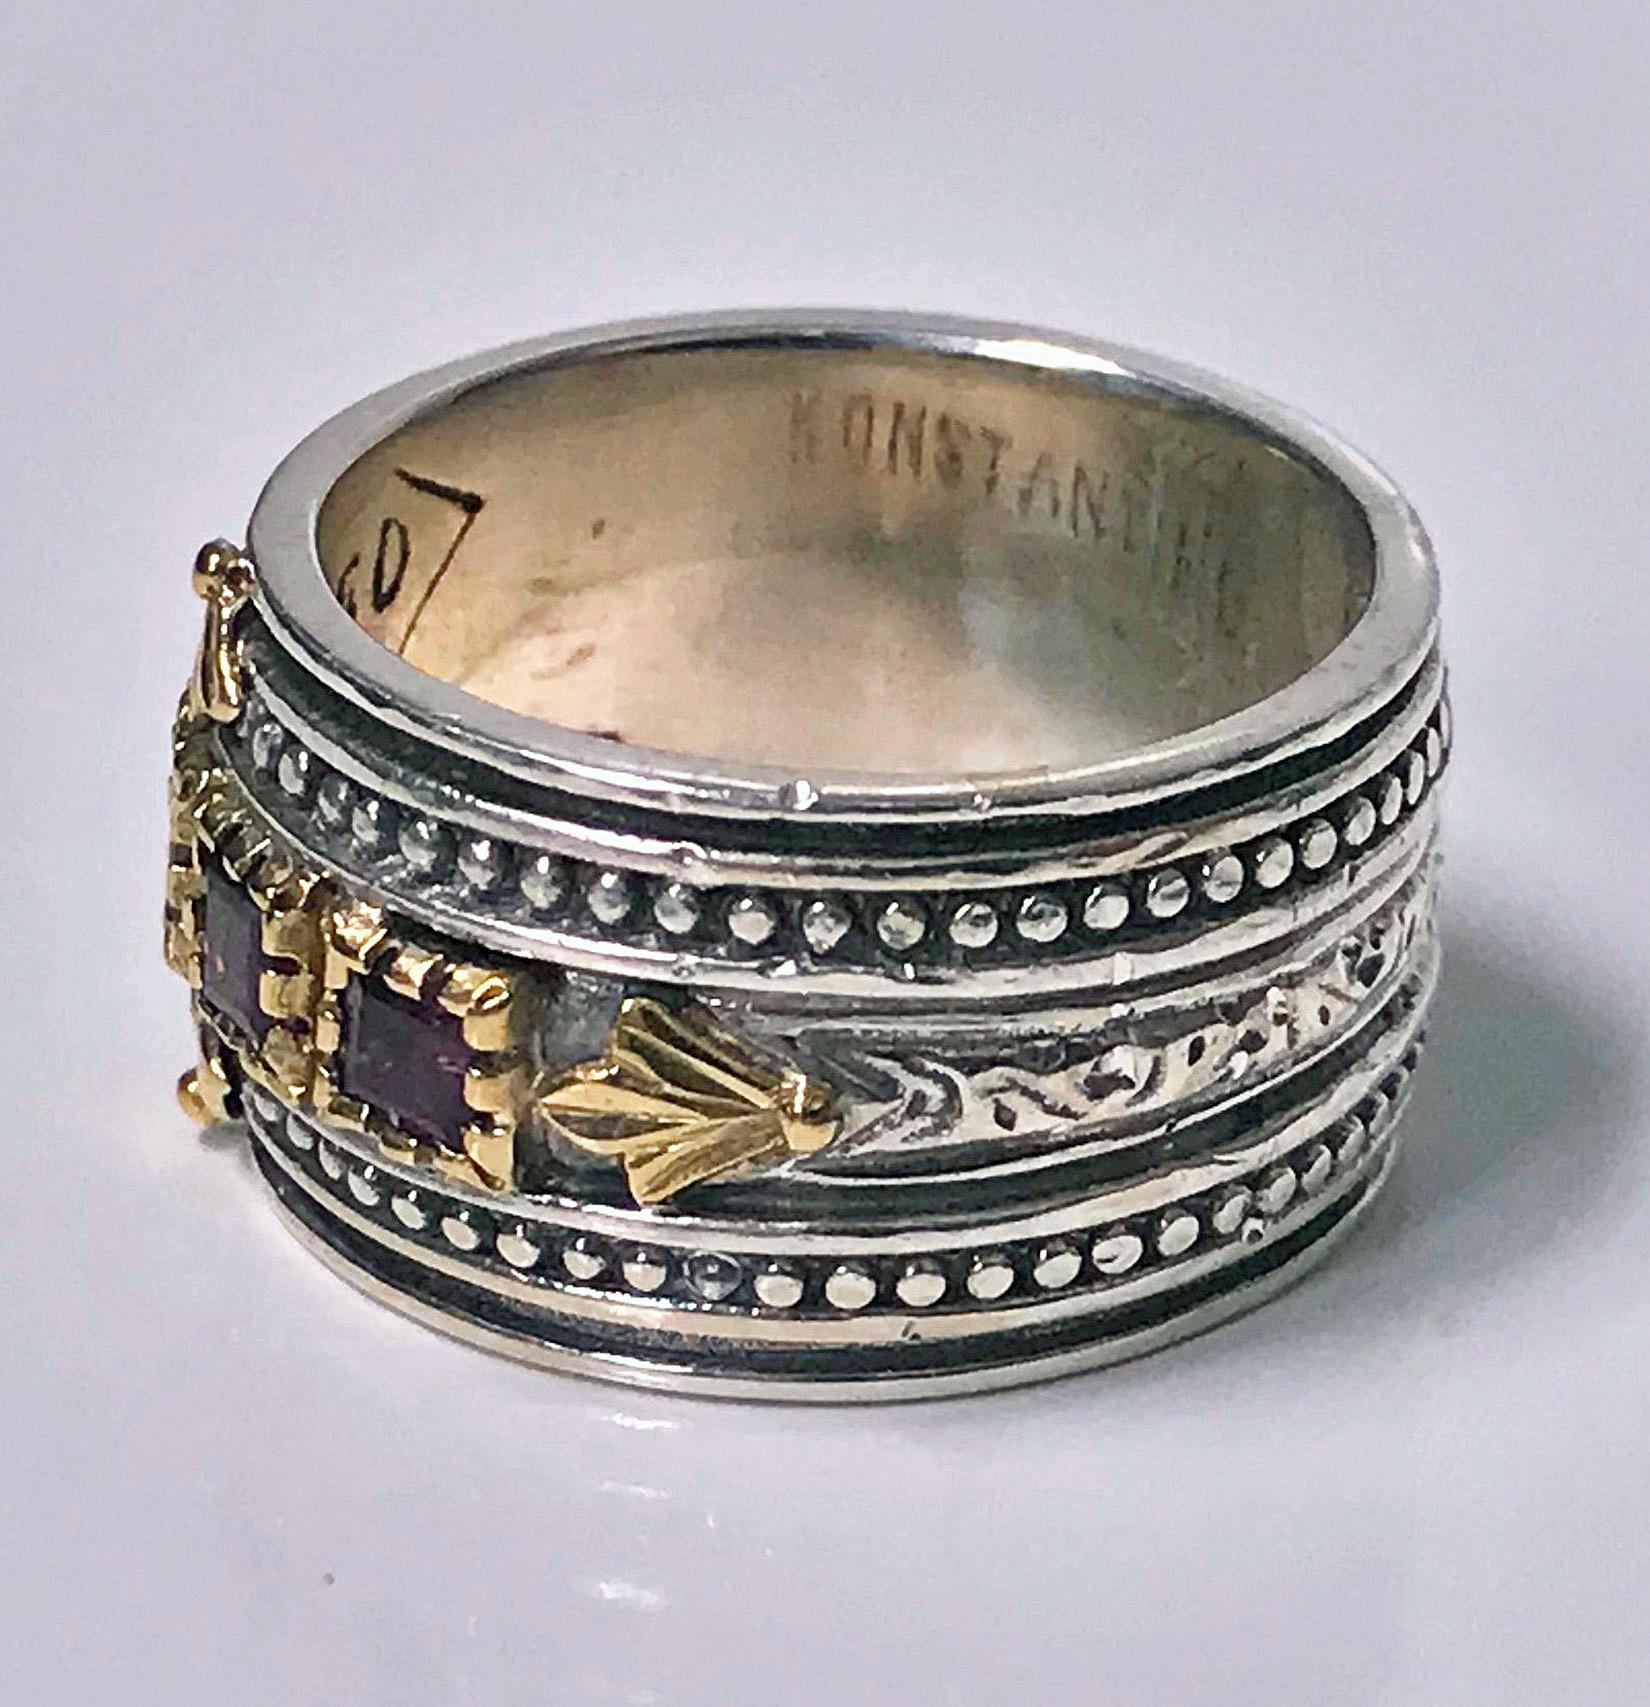 18K and Sterling Konstantino Rhodolite Band Ring. The Ring 18K claw and foliate set with five square cut rhodolites surmounted on sterling bead and foliate design band. Stamped 750 925 Konstantino on interior. Width of Band: 11.70mm. Ring Size: 7.